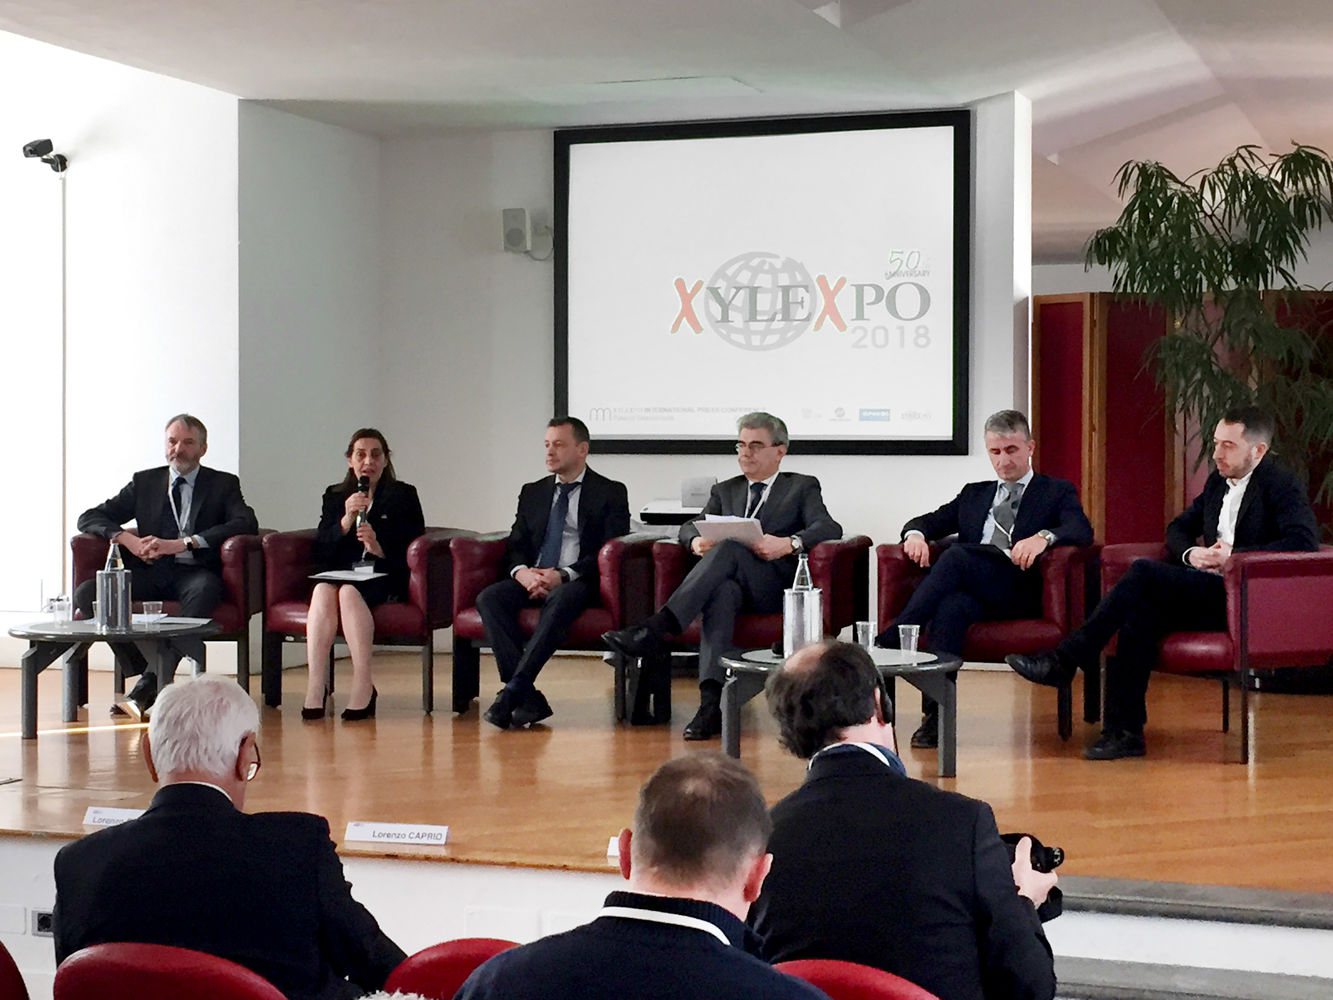 SCM at the Xylexpo International Press Conference